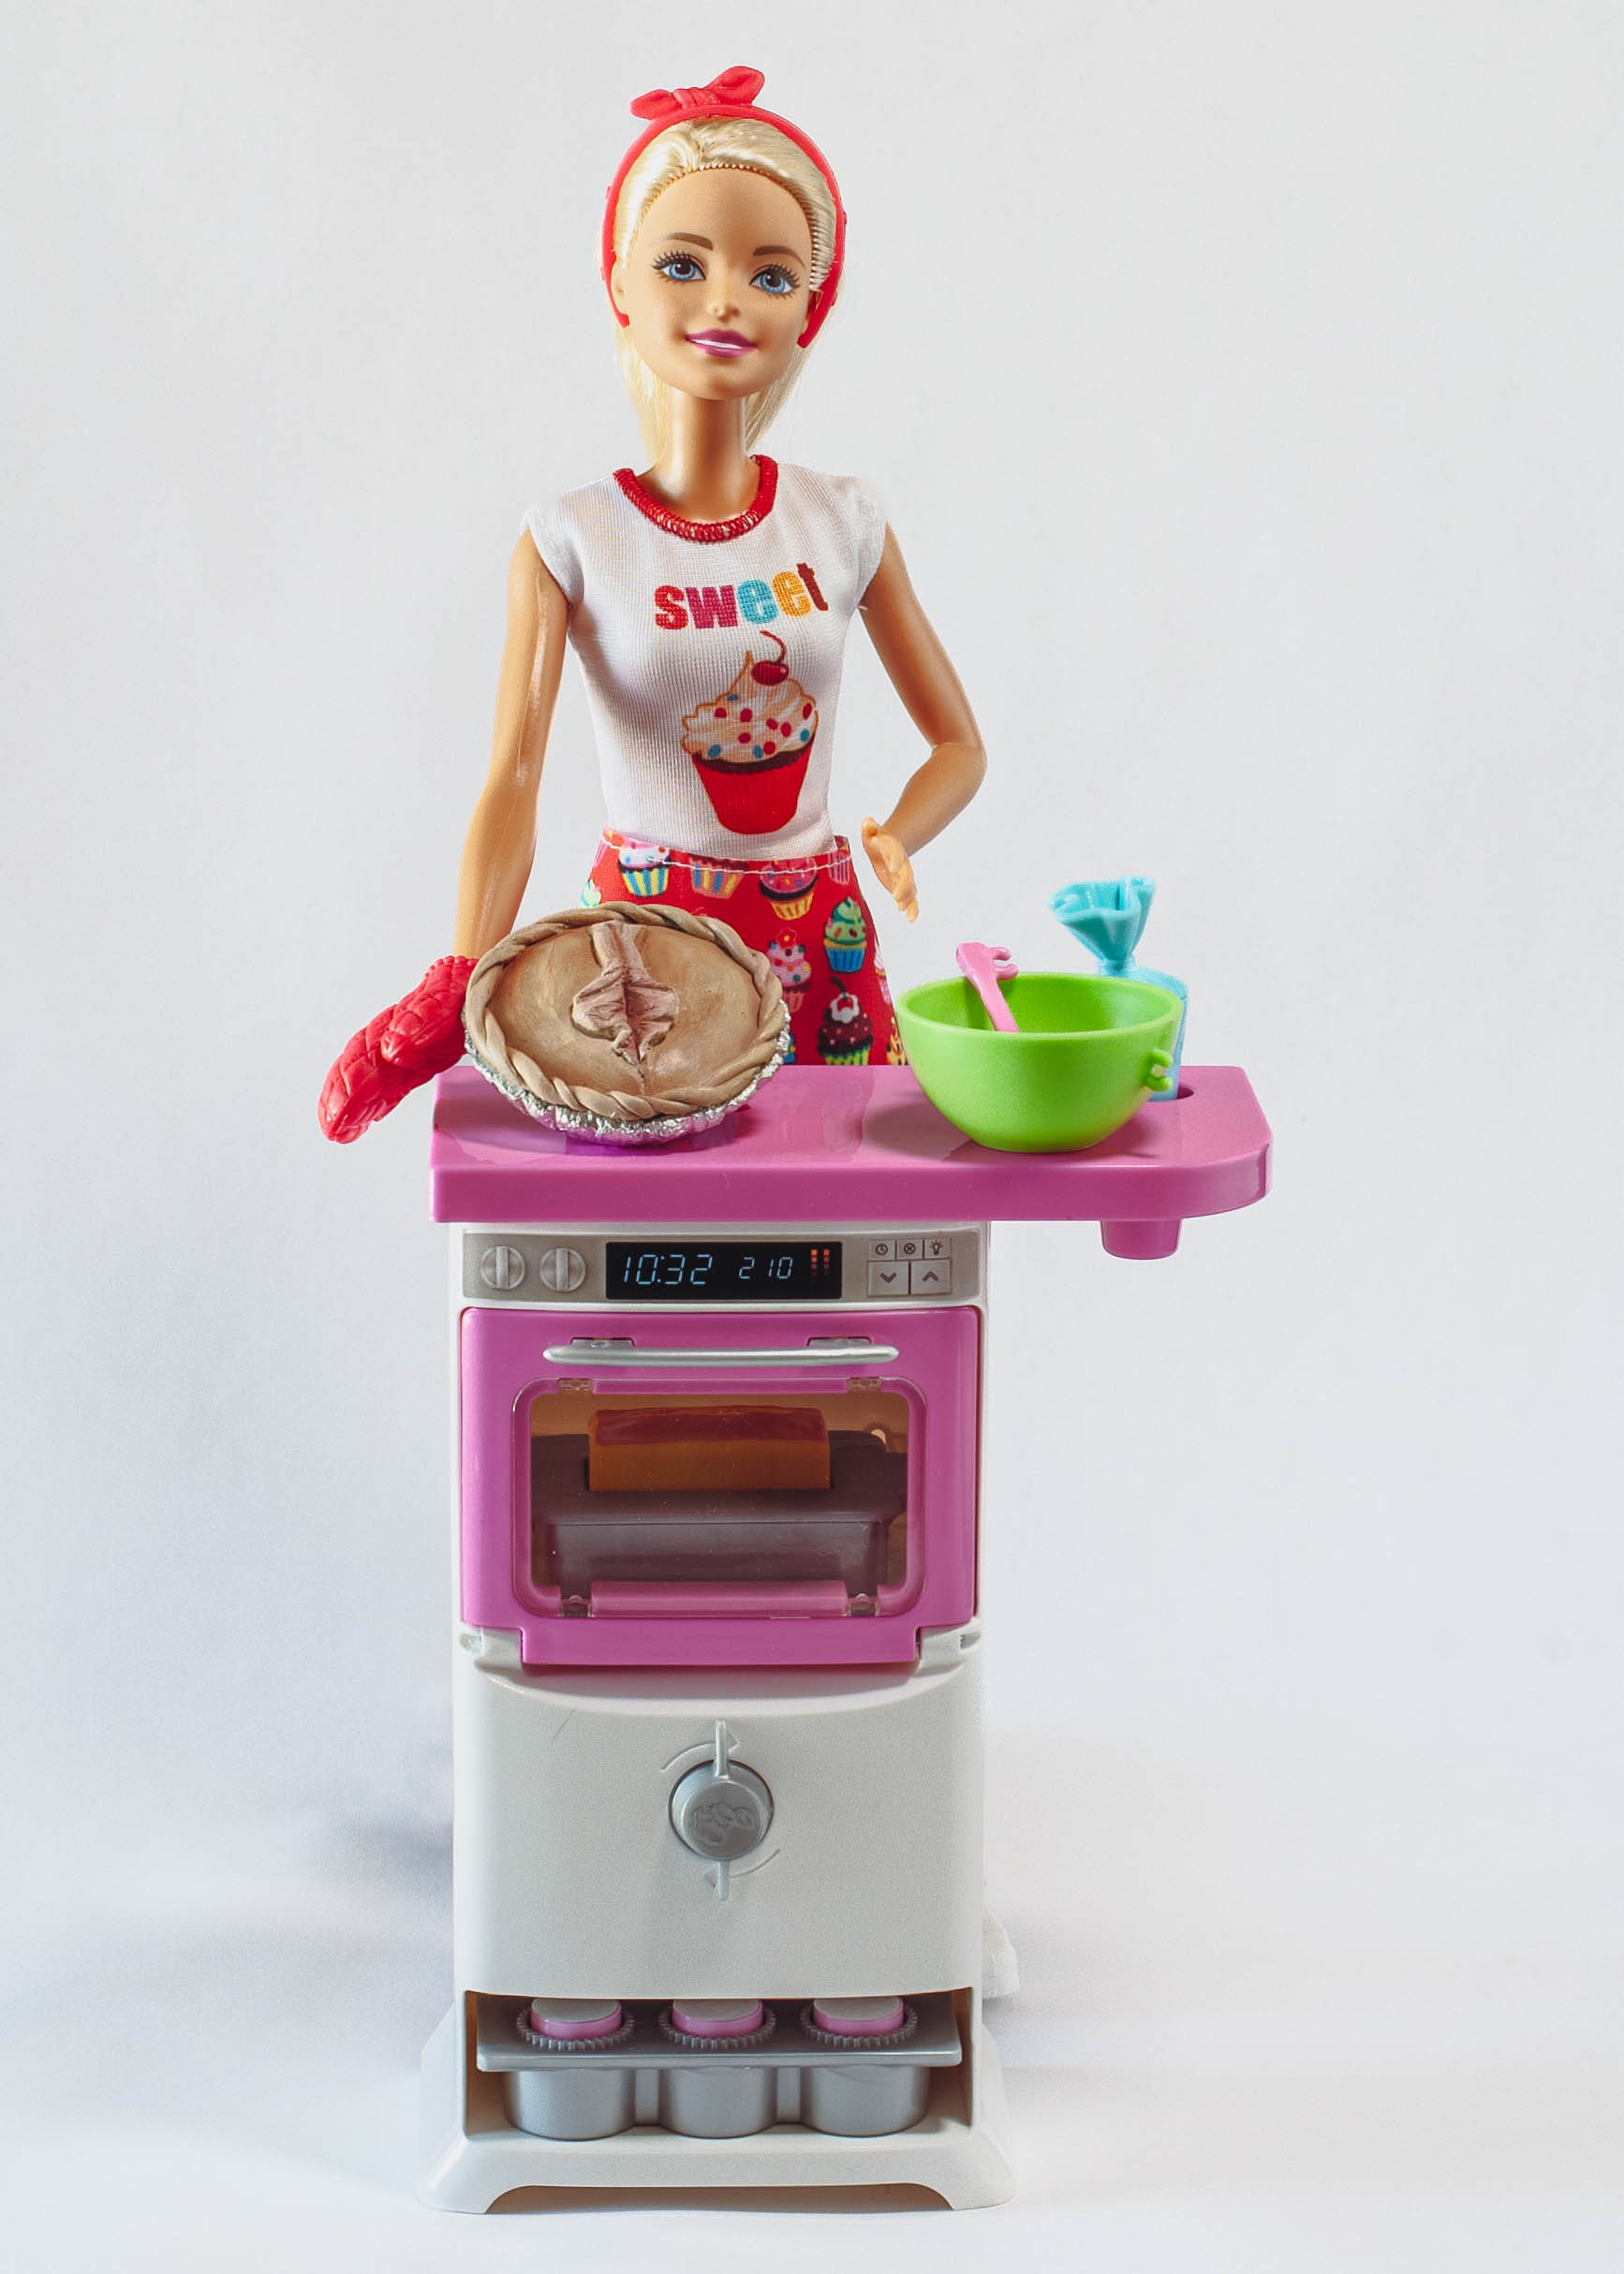 Baking Barbie on a white background. On the counter is a realist vulva pie made from polymer clay and the playset bowl and piping bag. 